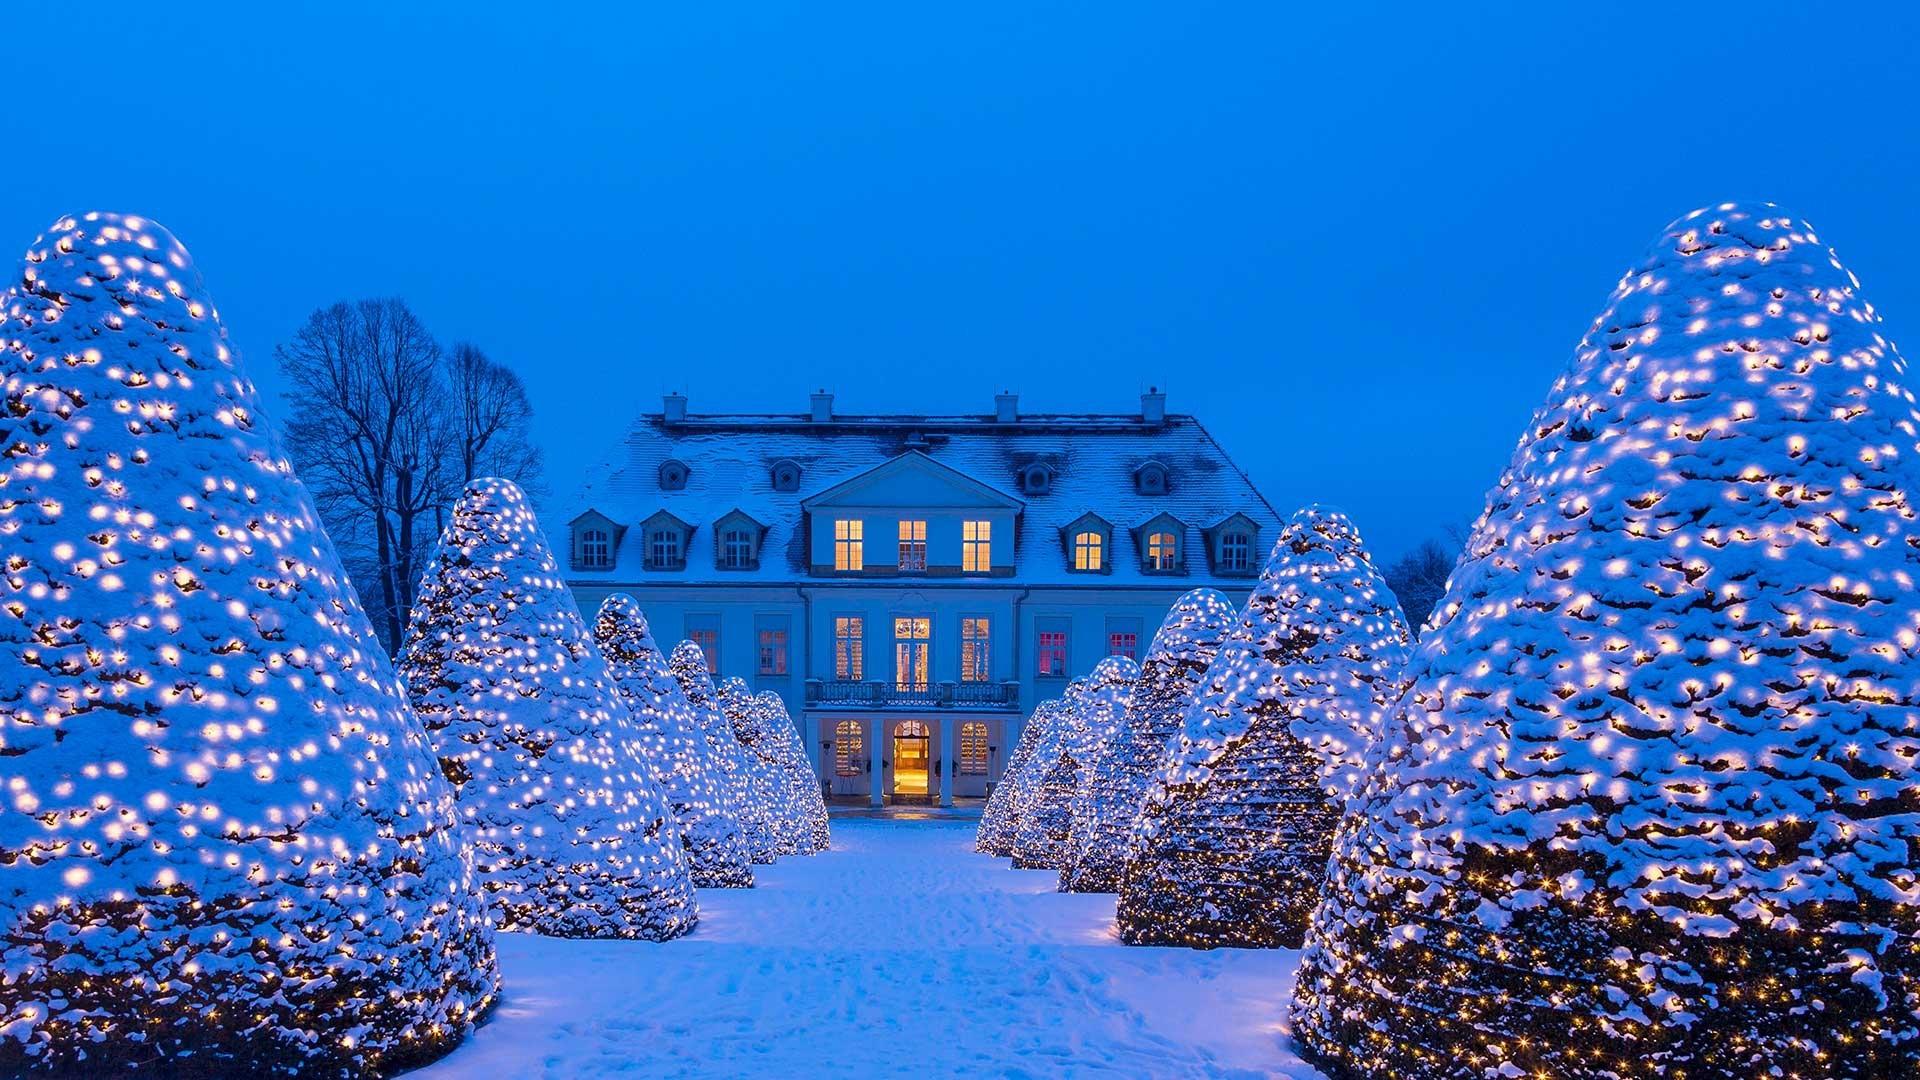 Wallpapers Germany, Saxony, snow, winter, lights, trees, night, castle, Christmas 1920x1080 Full HD 2K Picture, Image